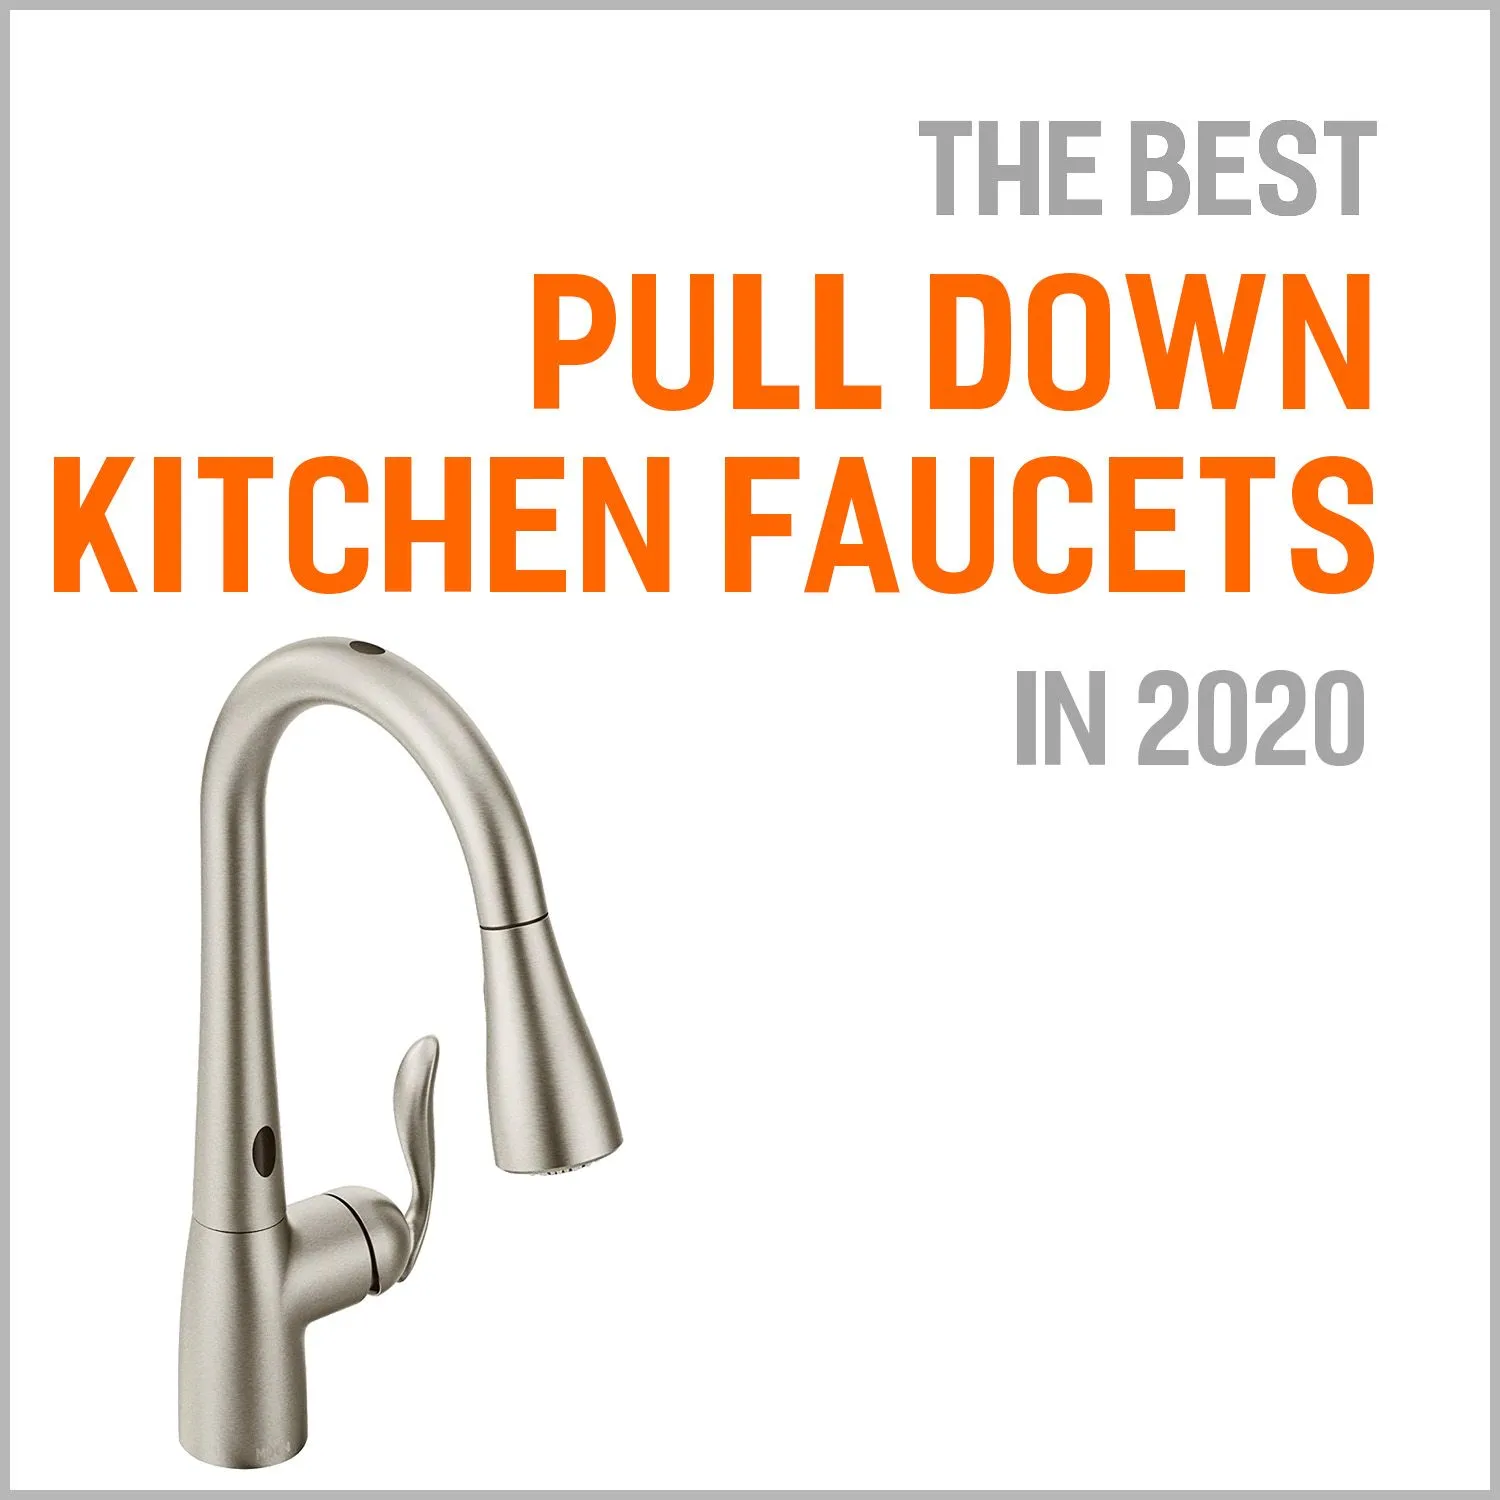 The Best Pull Down Kitchen Faucet Of 2020 Buyers Guide Reviews